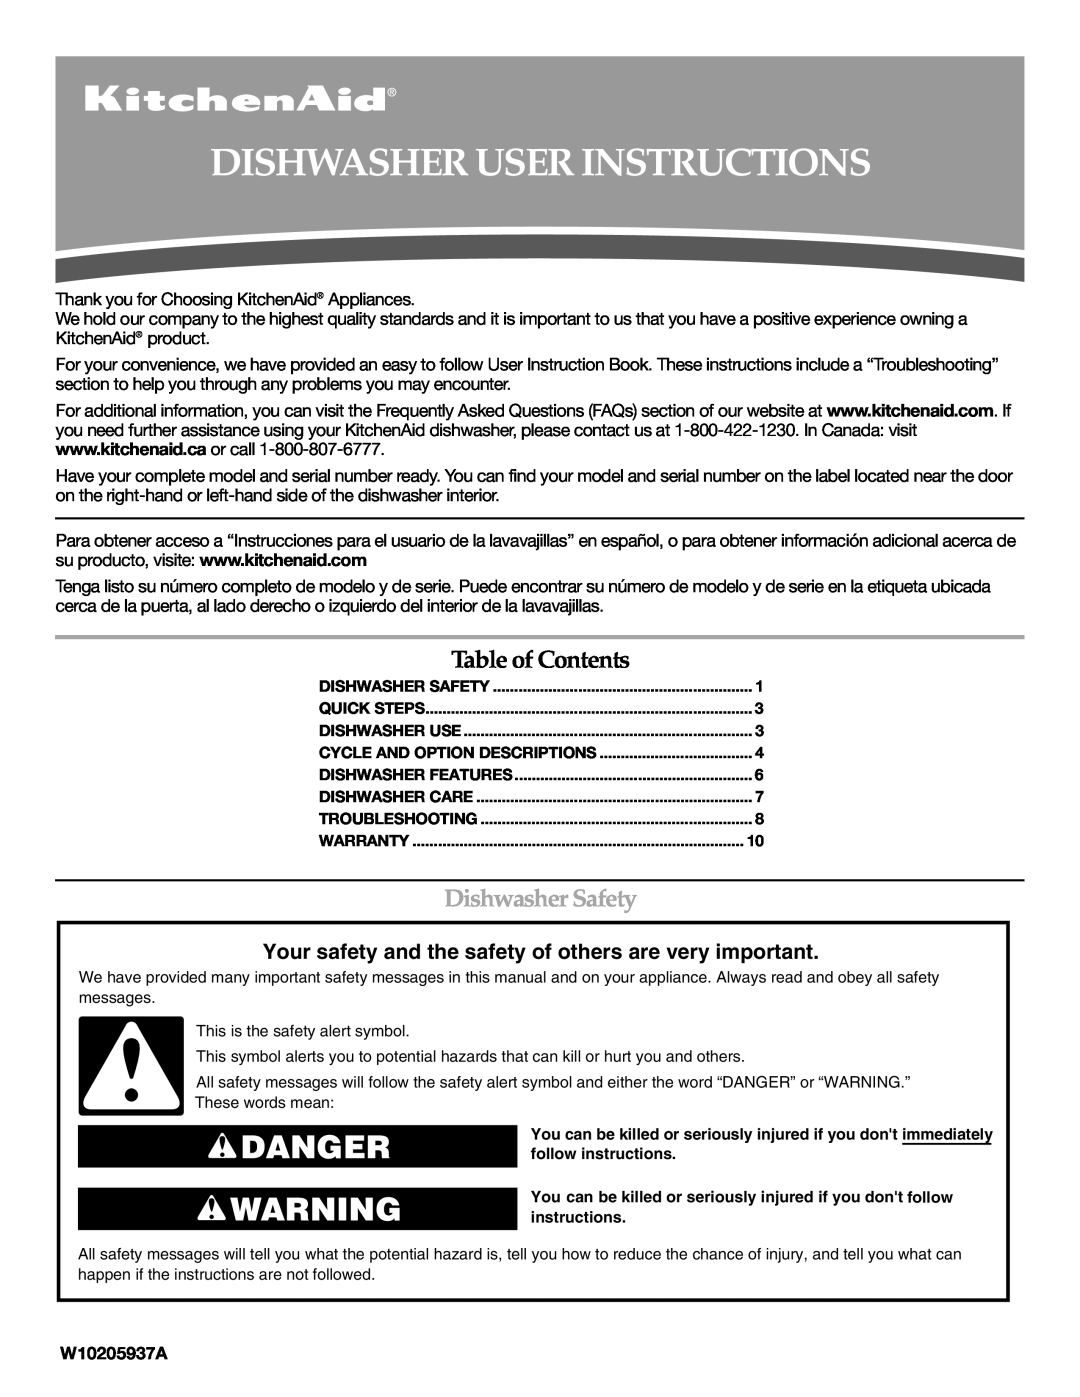 KitchenAid W10205938A warranty Dishwasher User Instructions, Danger, Table of Contents, Dishwasher Safety, W10205937A 